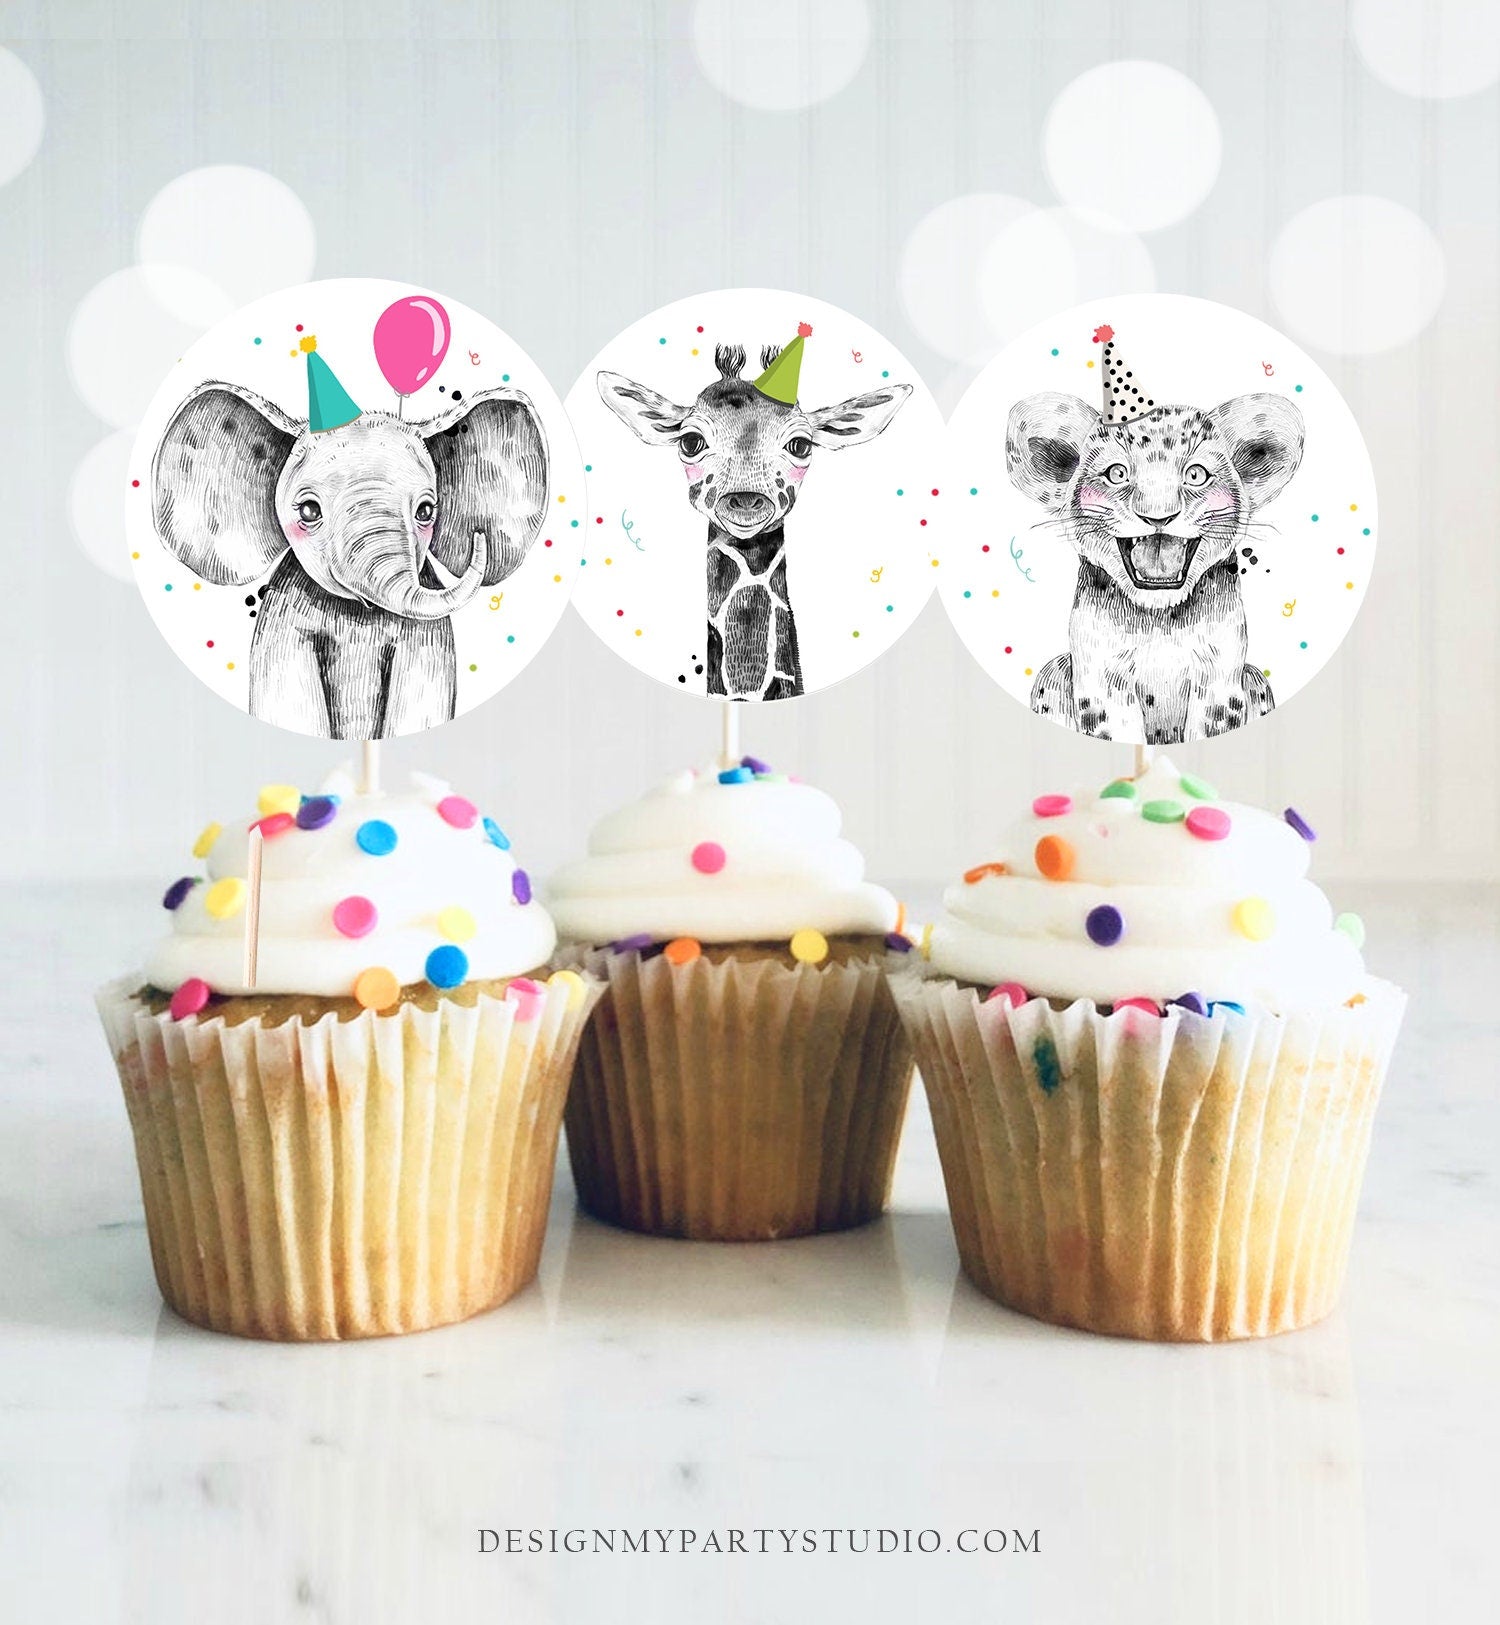 Party Animals Cupcake Toppers Favor Tags Birthday Party Decoration Safari Animals Zoo Birthday Wild One download Digital PRINTABLE 0390